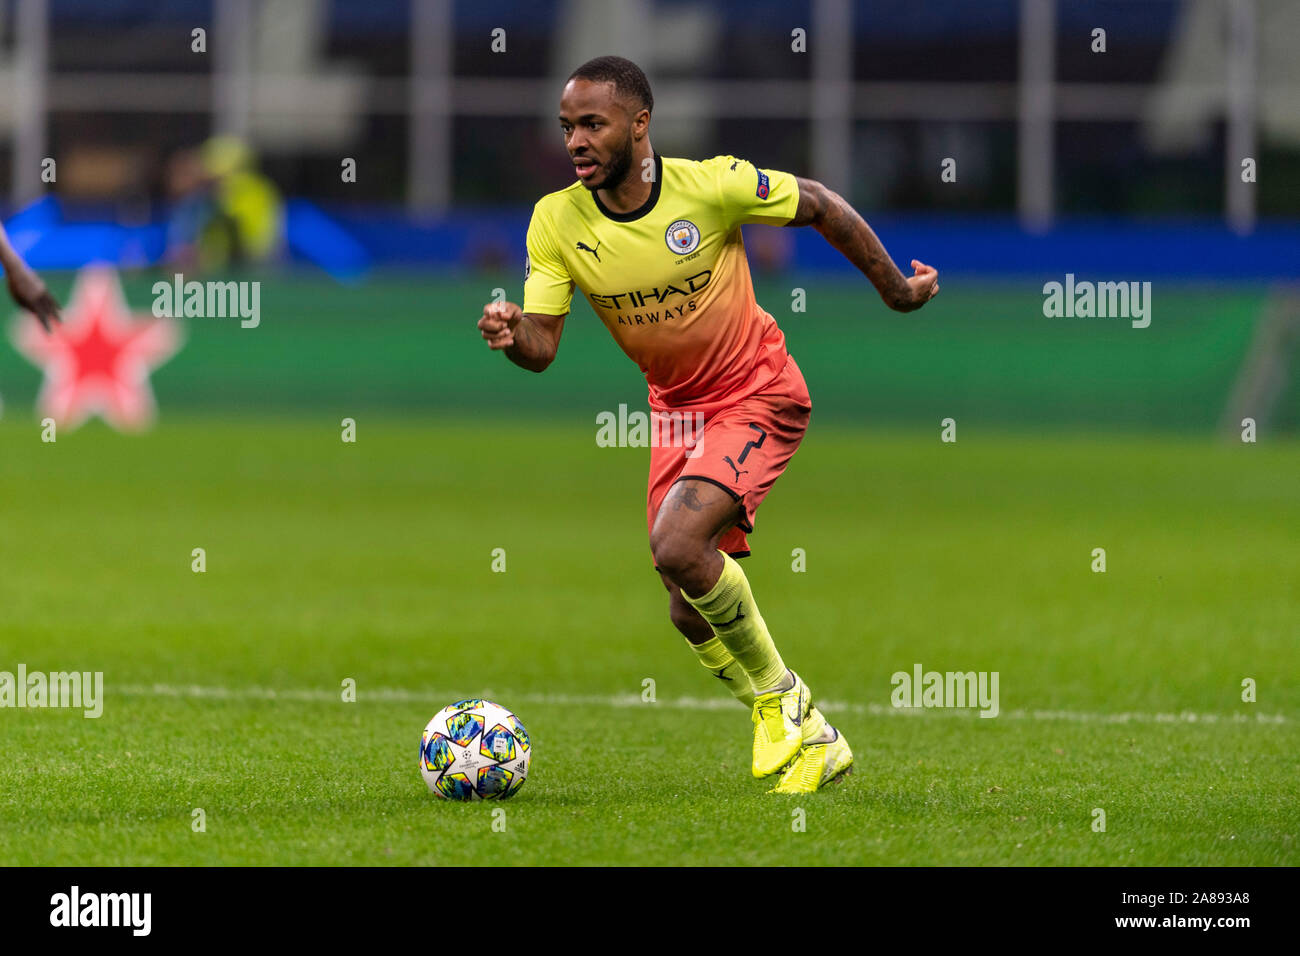 Raheem Sterling (Manchester City) during the Uefa 'Champions League ' Group Stage third match between Atalanta 1-1 Manchester City at Giuseppe Meazza Stadium on November 06, 2019 in Milano, Italy. Credit: Maurizio Borsari/AFLO/Alamy Live News Stock Photo